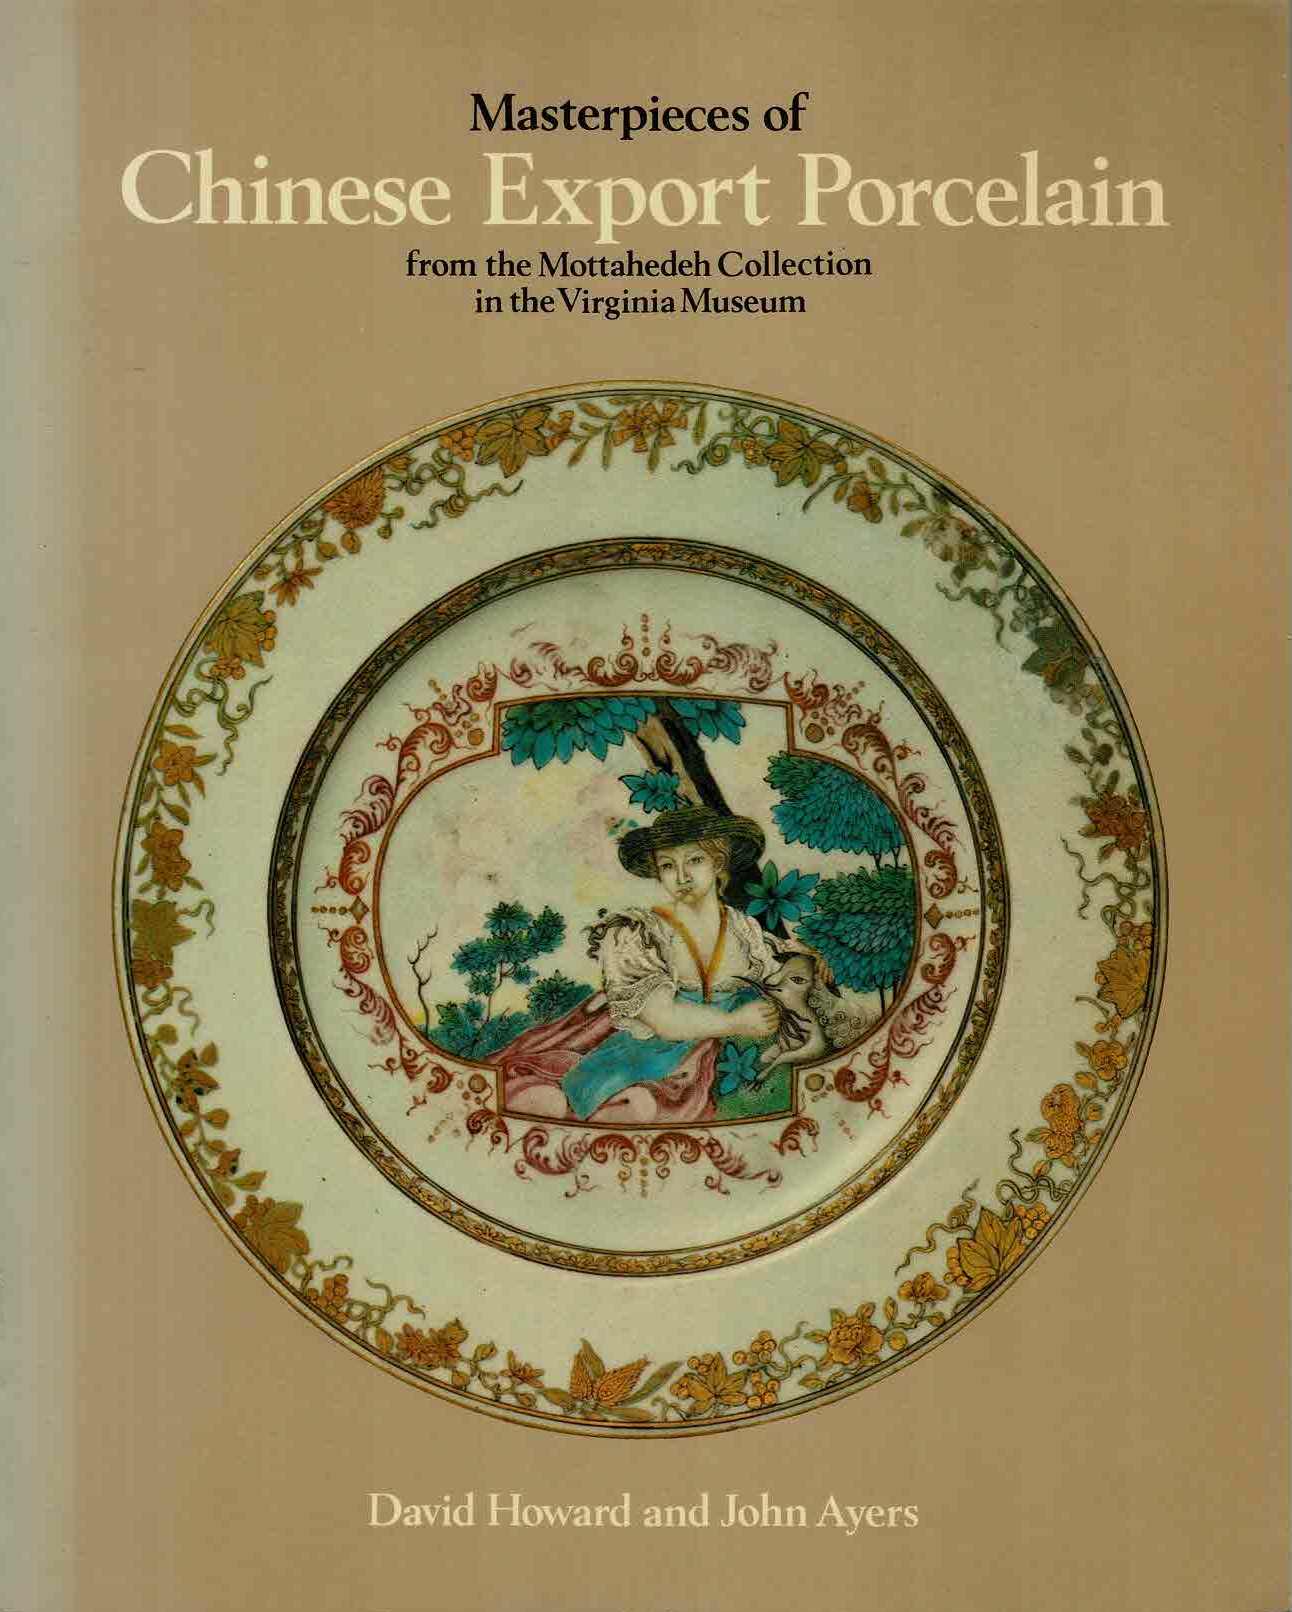 Howard, David S. & Ayers, John - Masterpieces of Chinese Export Porcelain From the Mottahedeh Collection in the Virginia Museum